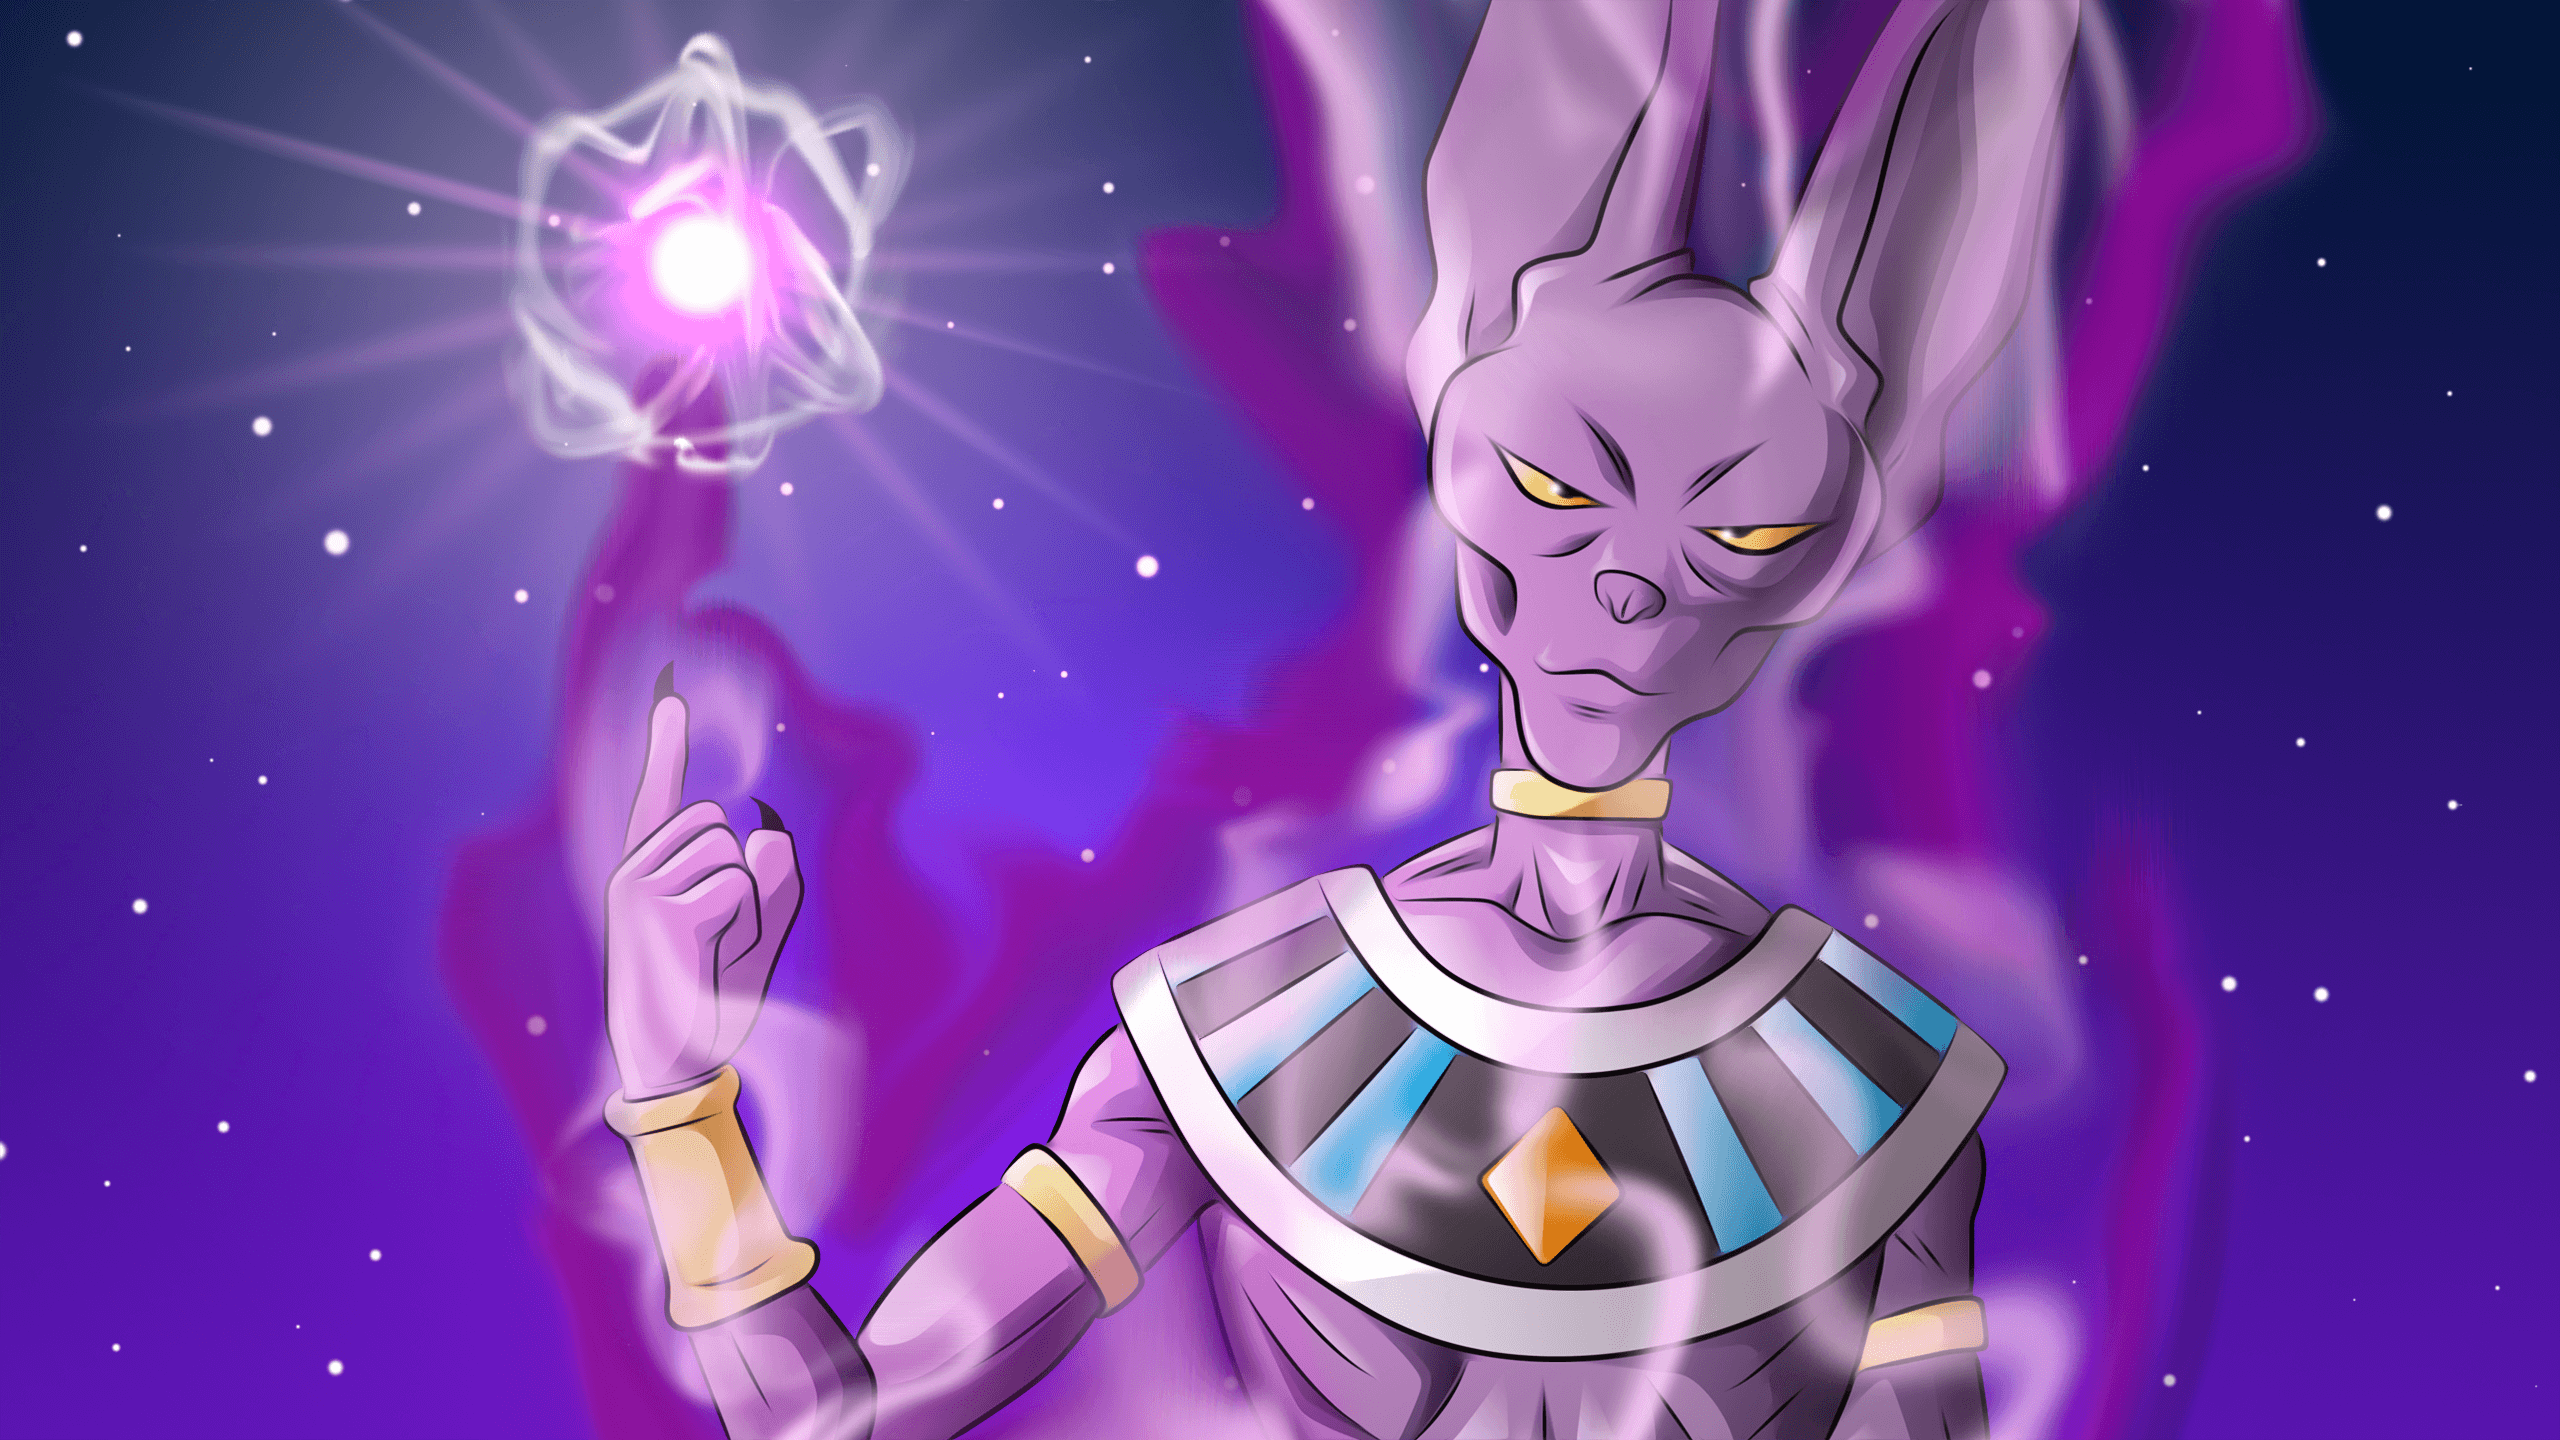 Lord Beerus Wallpapers - Wallpaper Cave.